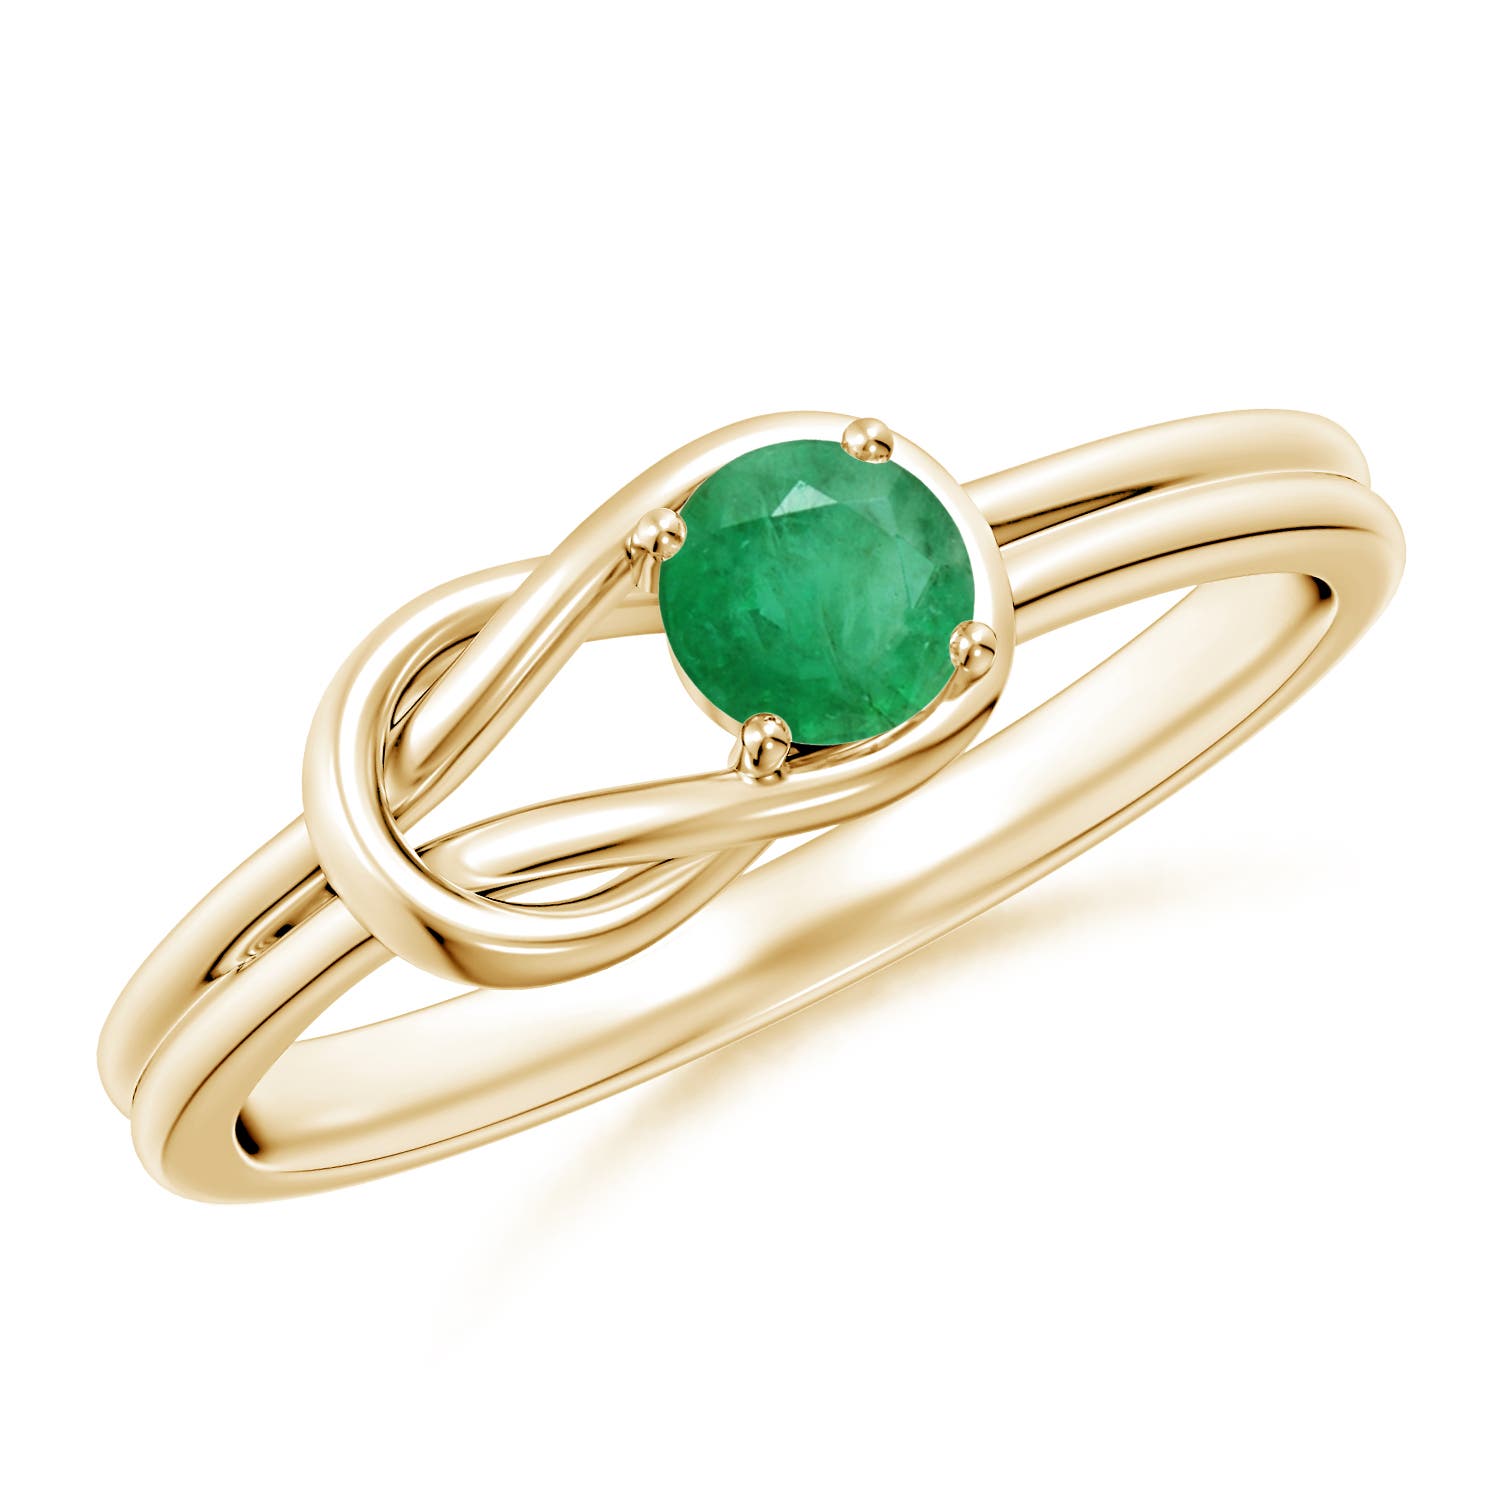 A - Emerald / 0.24 CT / 14 KT Yellow Gold